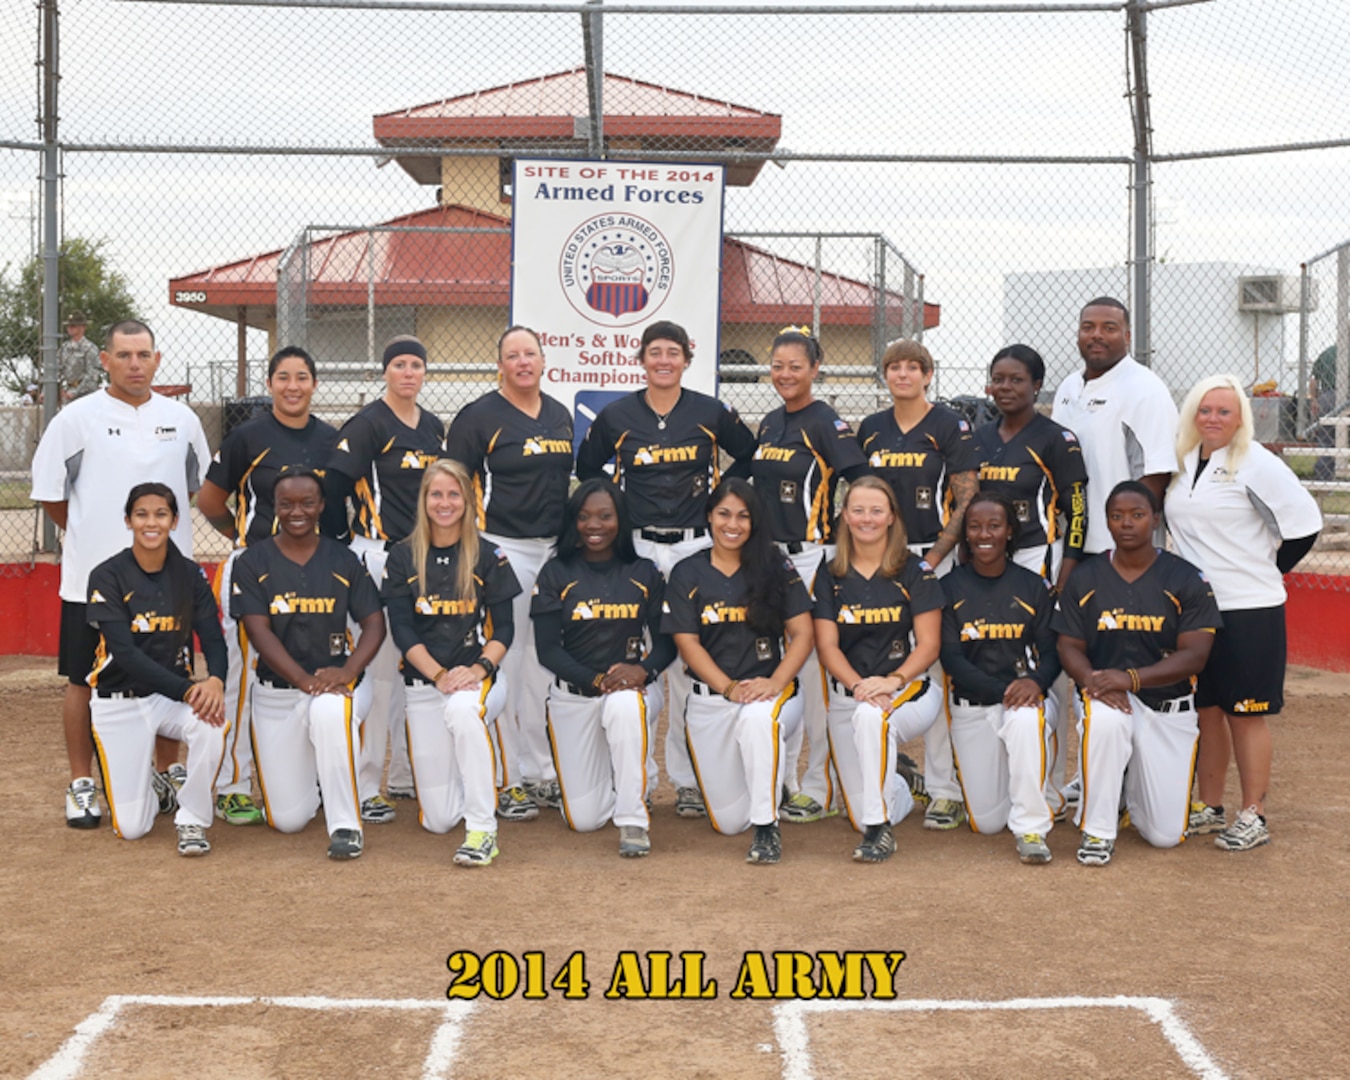 2014 All Army Womens Softball team at the 2014 Armed Forces Womens Softball Championship at Fort Sill, Okla. 14-19 Sept.